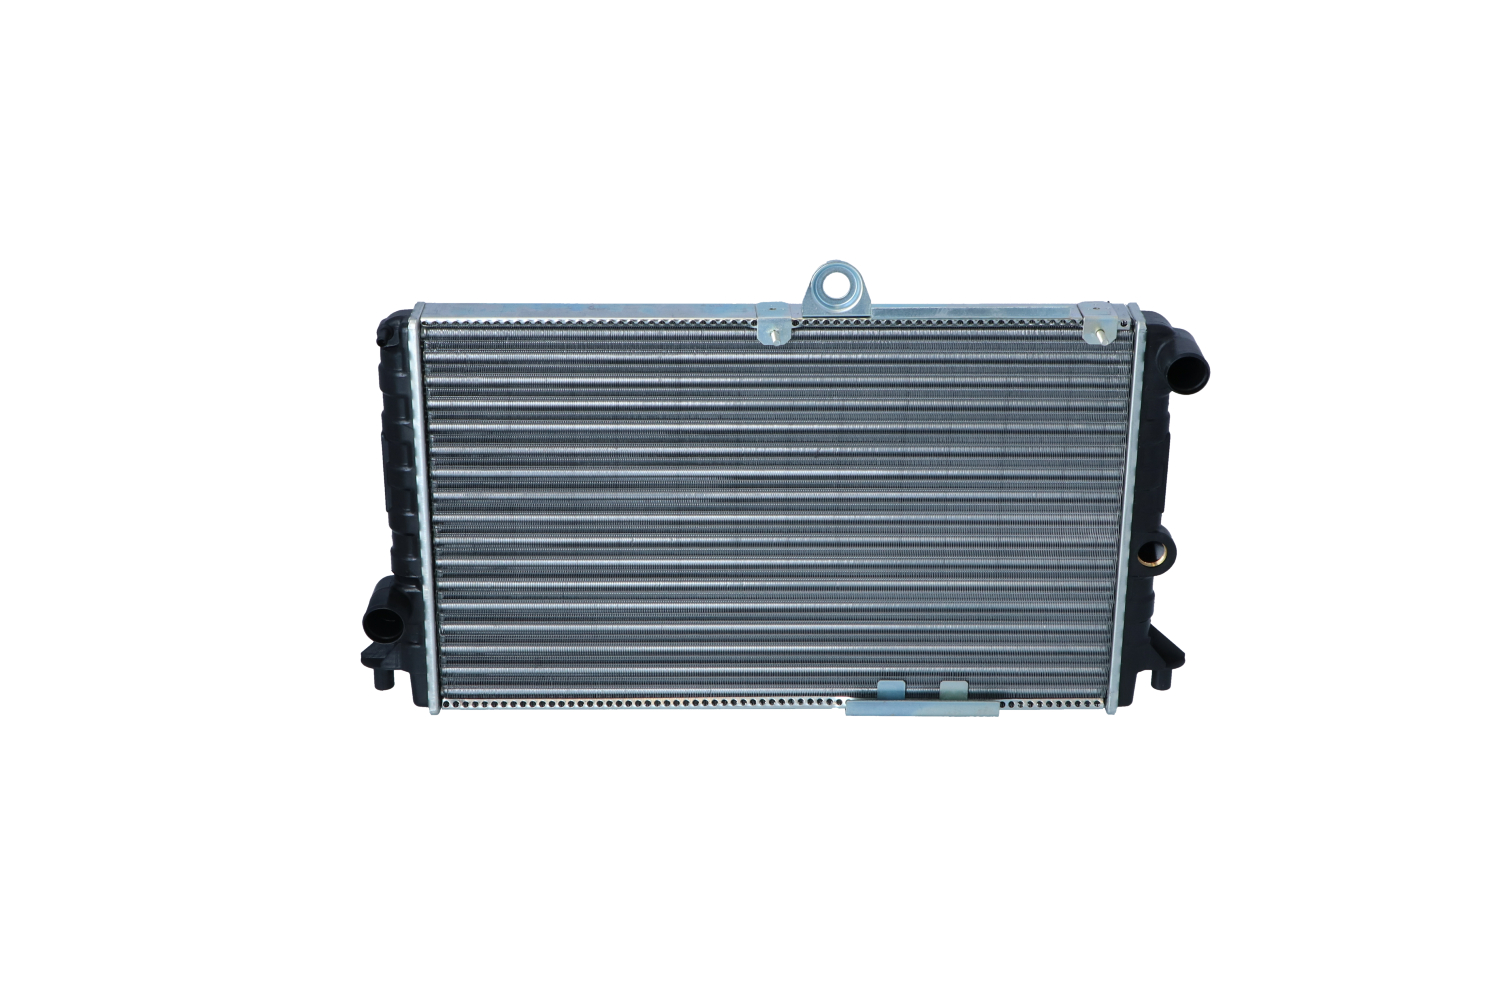 NRF Aluminium, 520 x 322 x 34 mm, Mechanically jointed cooling fins Radiator 58809 buy